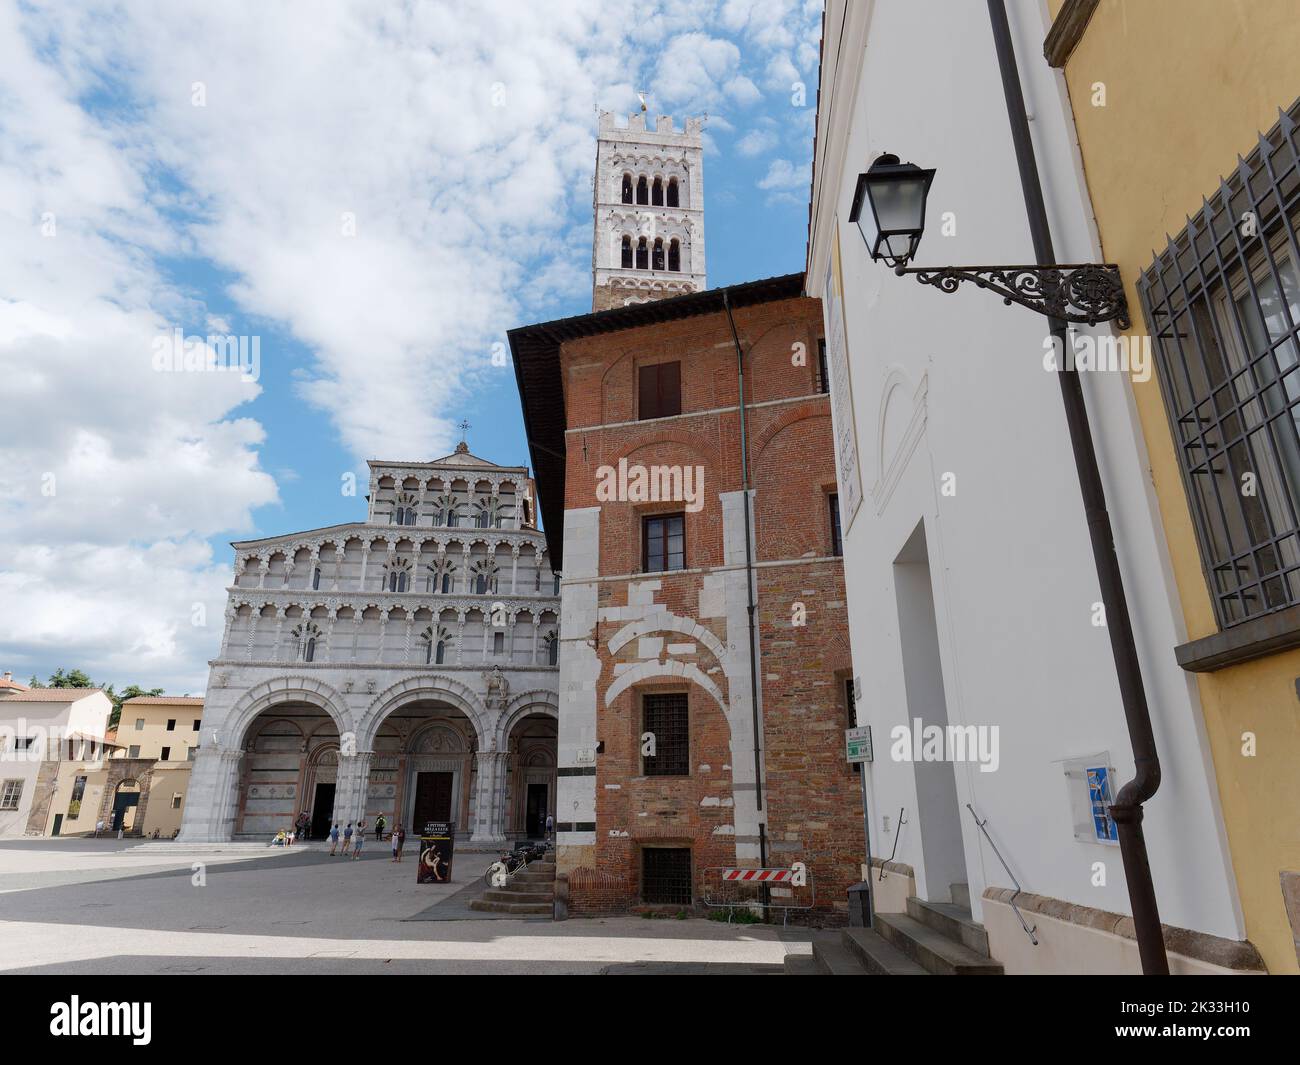 San Martino (St Martin) Cathedral with nearby properties n Lucca, Tuscany, Italy Stock Photo